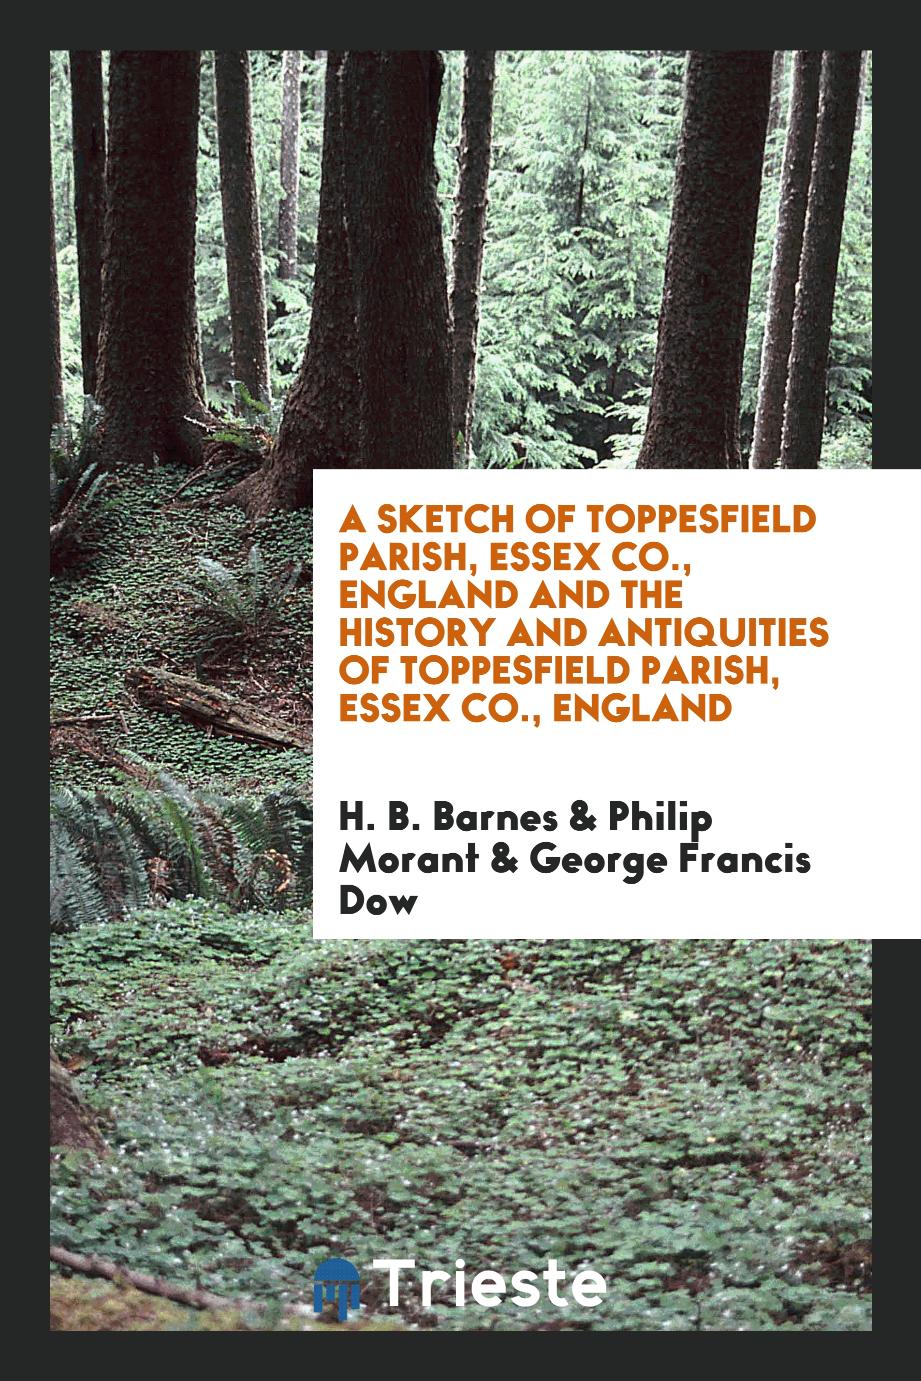 A sketch of Toppesfield Parish, Essex Co., England and The history and antiquities of Toppesfield Parish, Essex Co., England